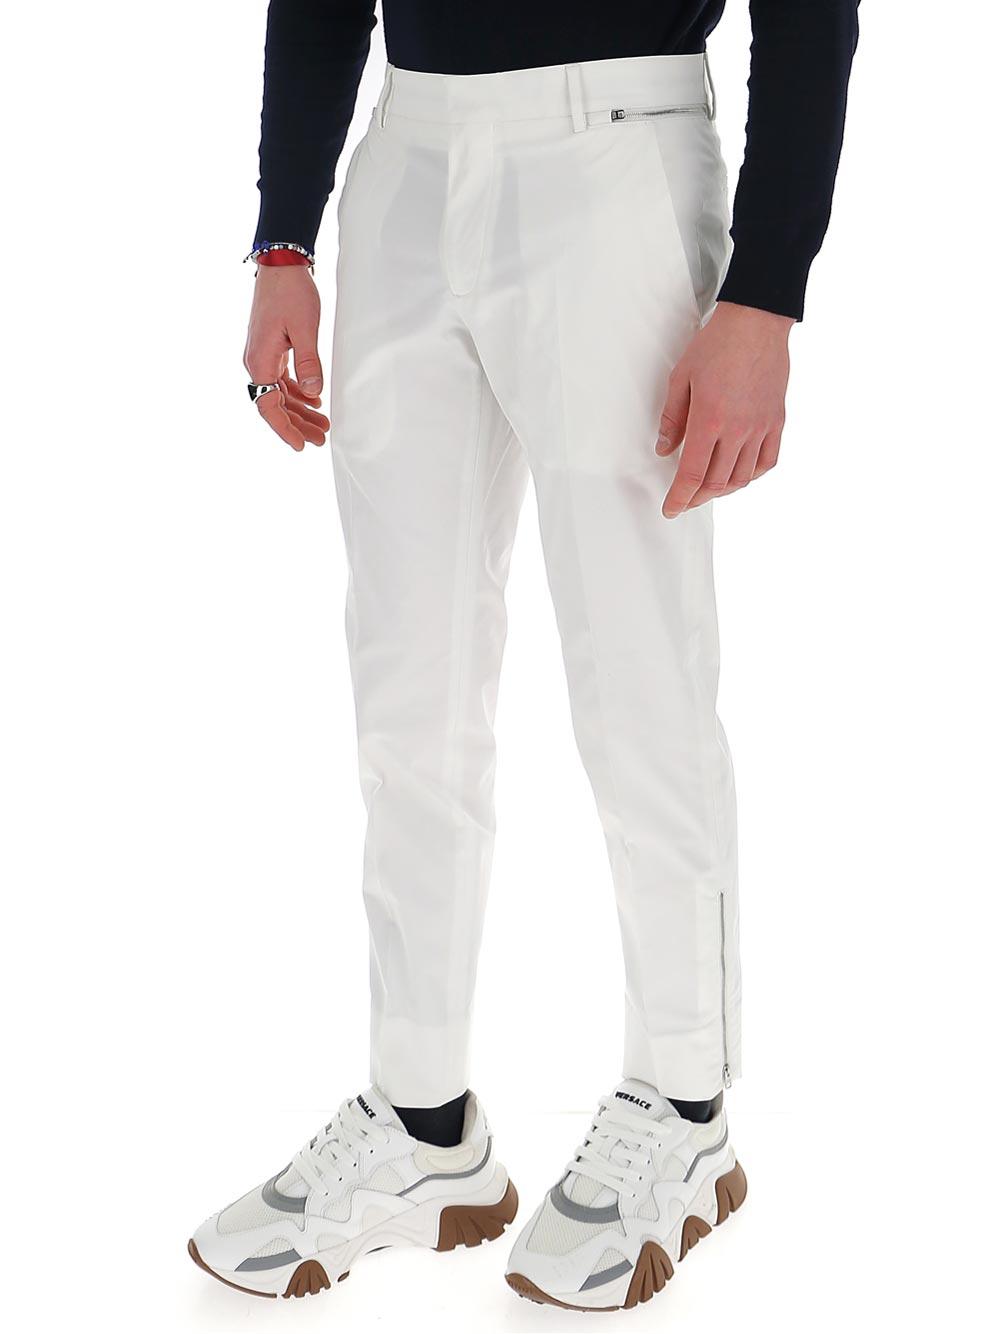 Prada Cotton Tailored Pants in White for Men - Lyst